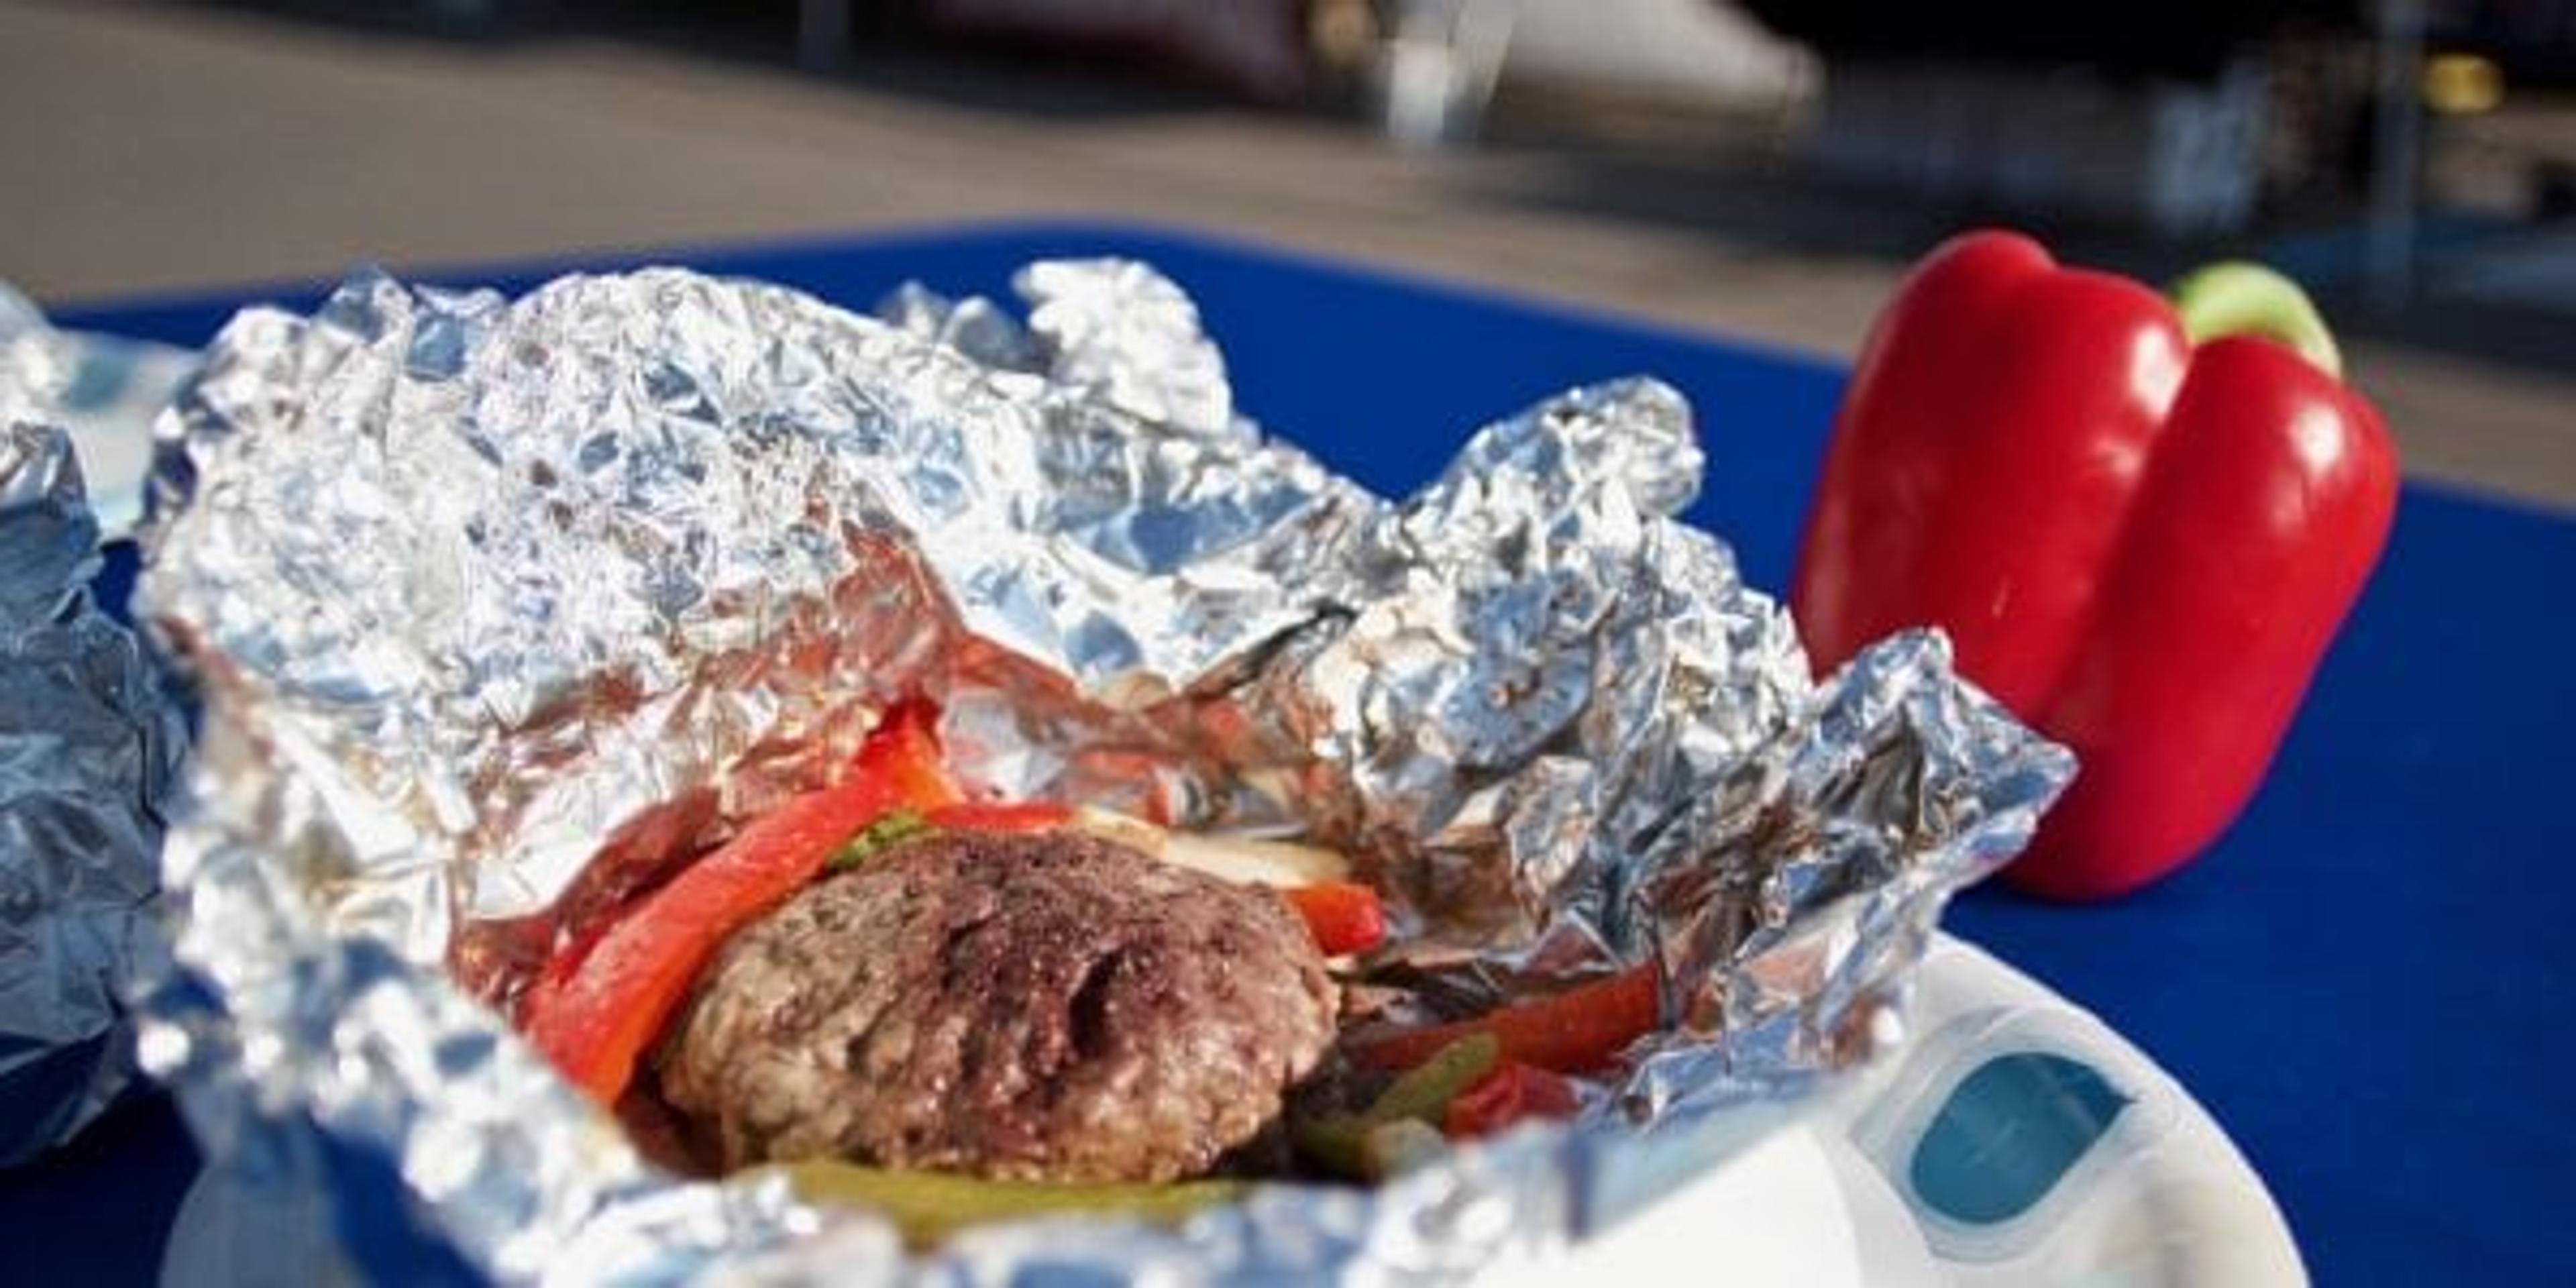 Foil pack on a table with a red pepper.